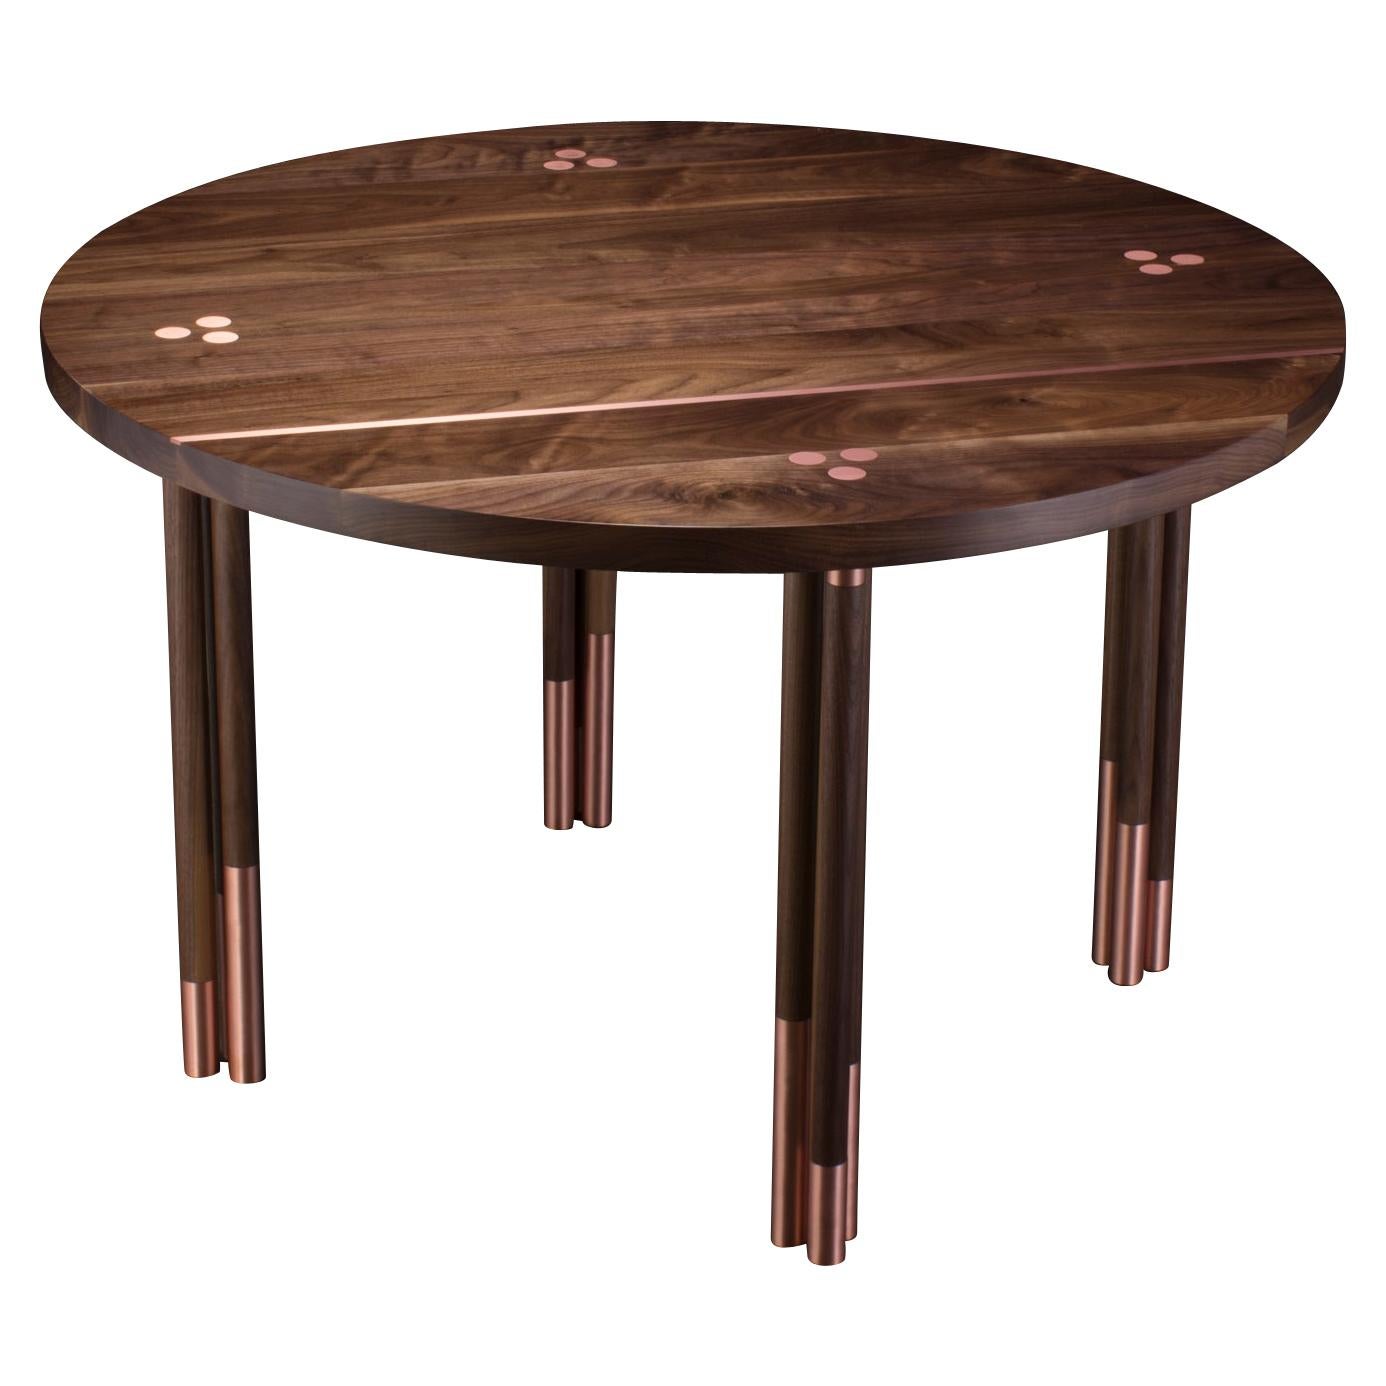 Walnut Circular Dining Table with Copper Inlay "Canfield Dining Table"